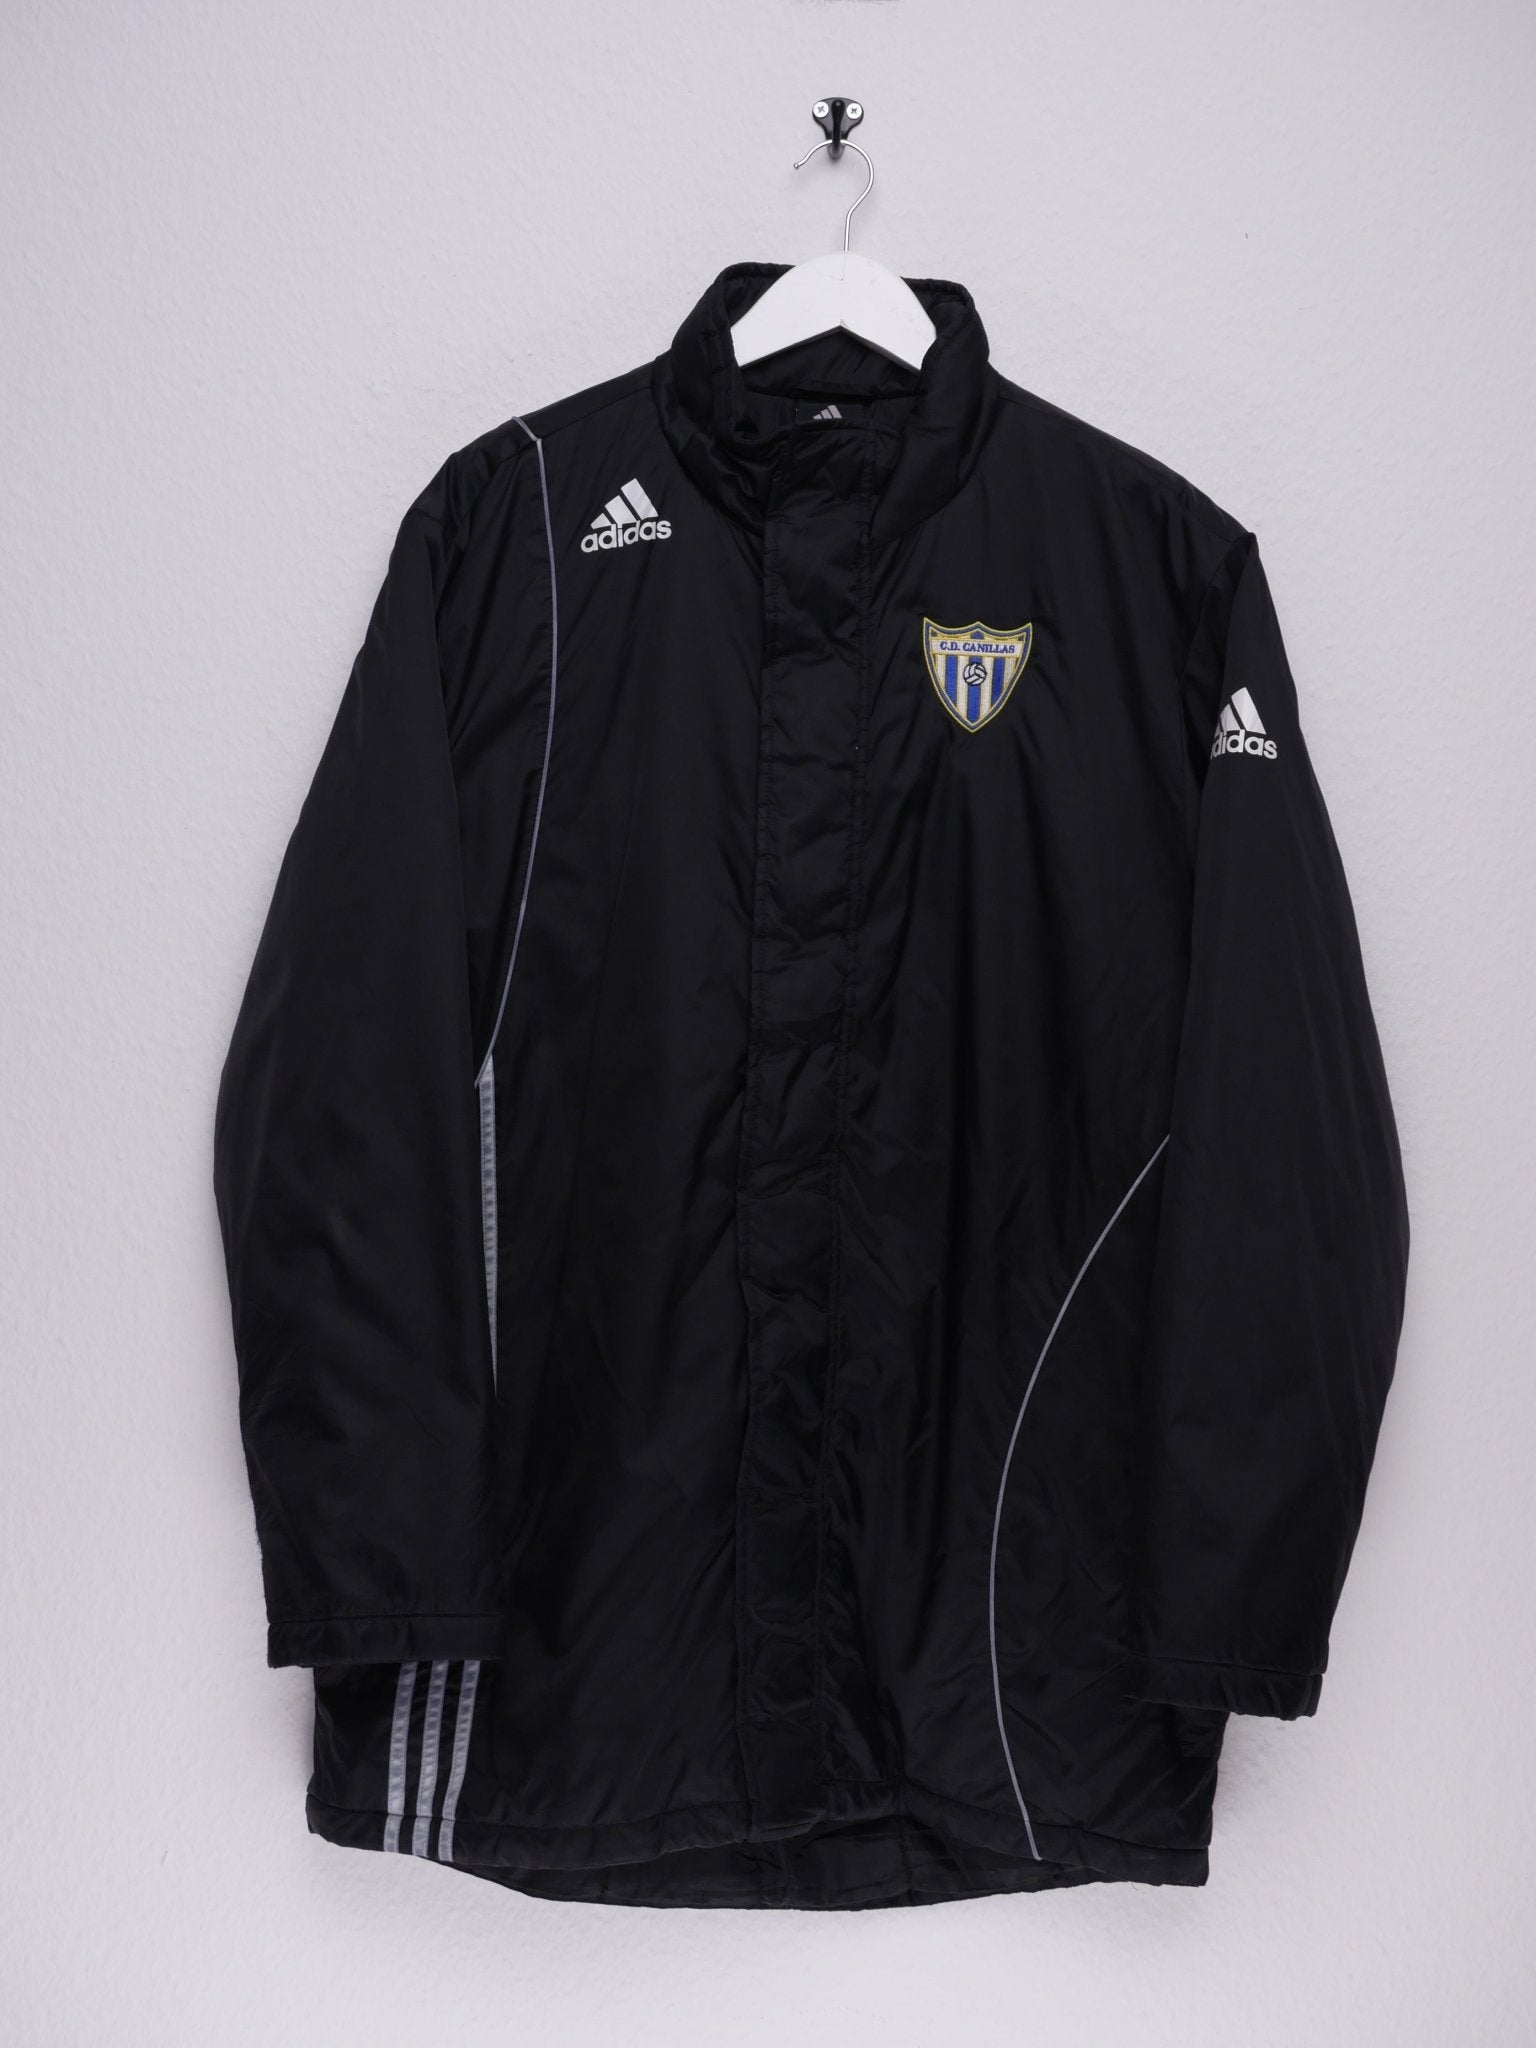 Adidas 'C.D. Canillas' embroidered Parka Jacket - Peeces